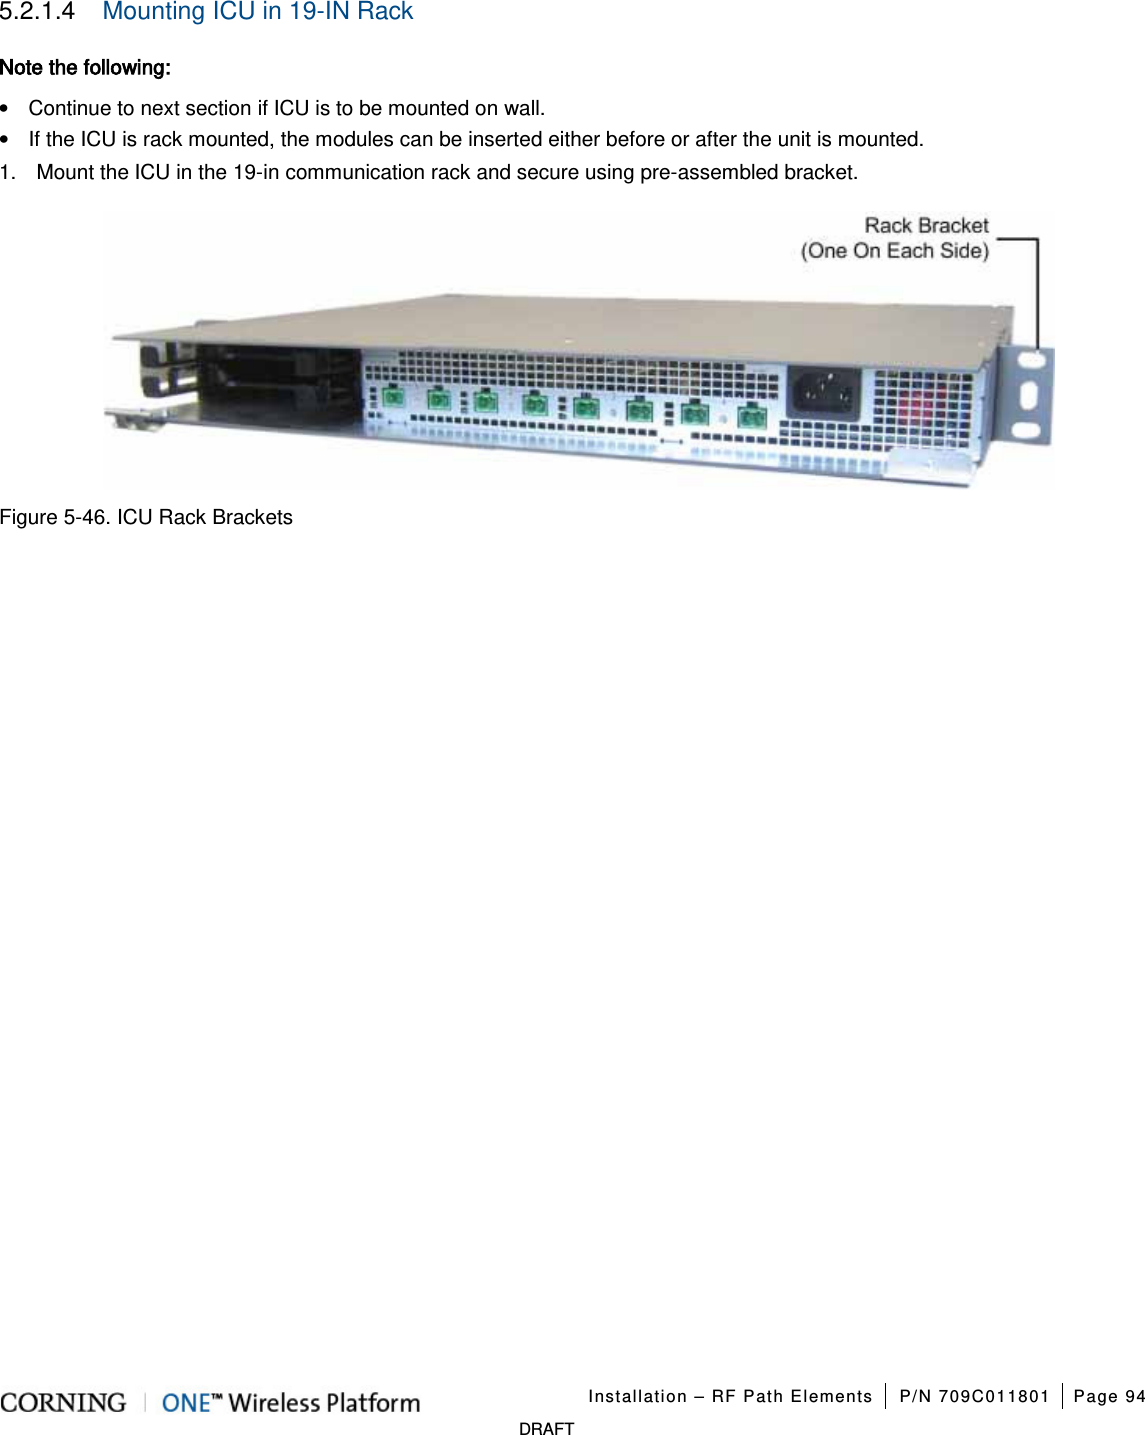   Installation – RF Path Elements P/N 709C011801 Page 94   DRAFT 5.2.1.4  Mounting ICU in 19-IN Rack Note the following:   • Continue to next section if ICU is to be mounted on wall. • If the ICU is rack mounted, the modules can be inserted either before or after the unit is mounted.   1.  Mount the ICU in the 19-in communication rack and secure using pre-assembled bracket.    Figure  5-46. ICU Rack Brackets    